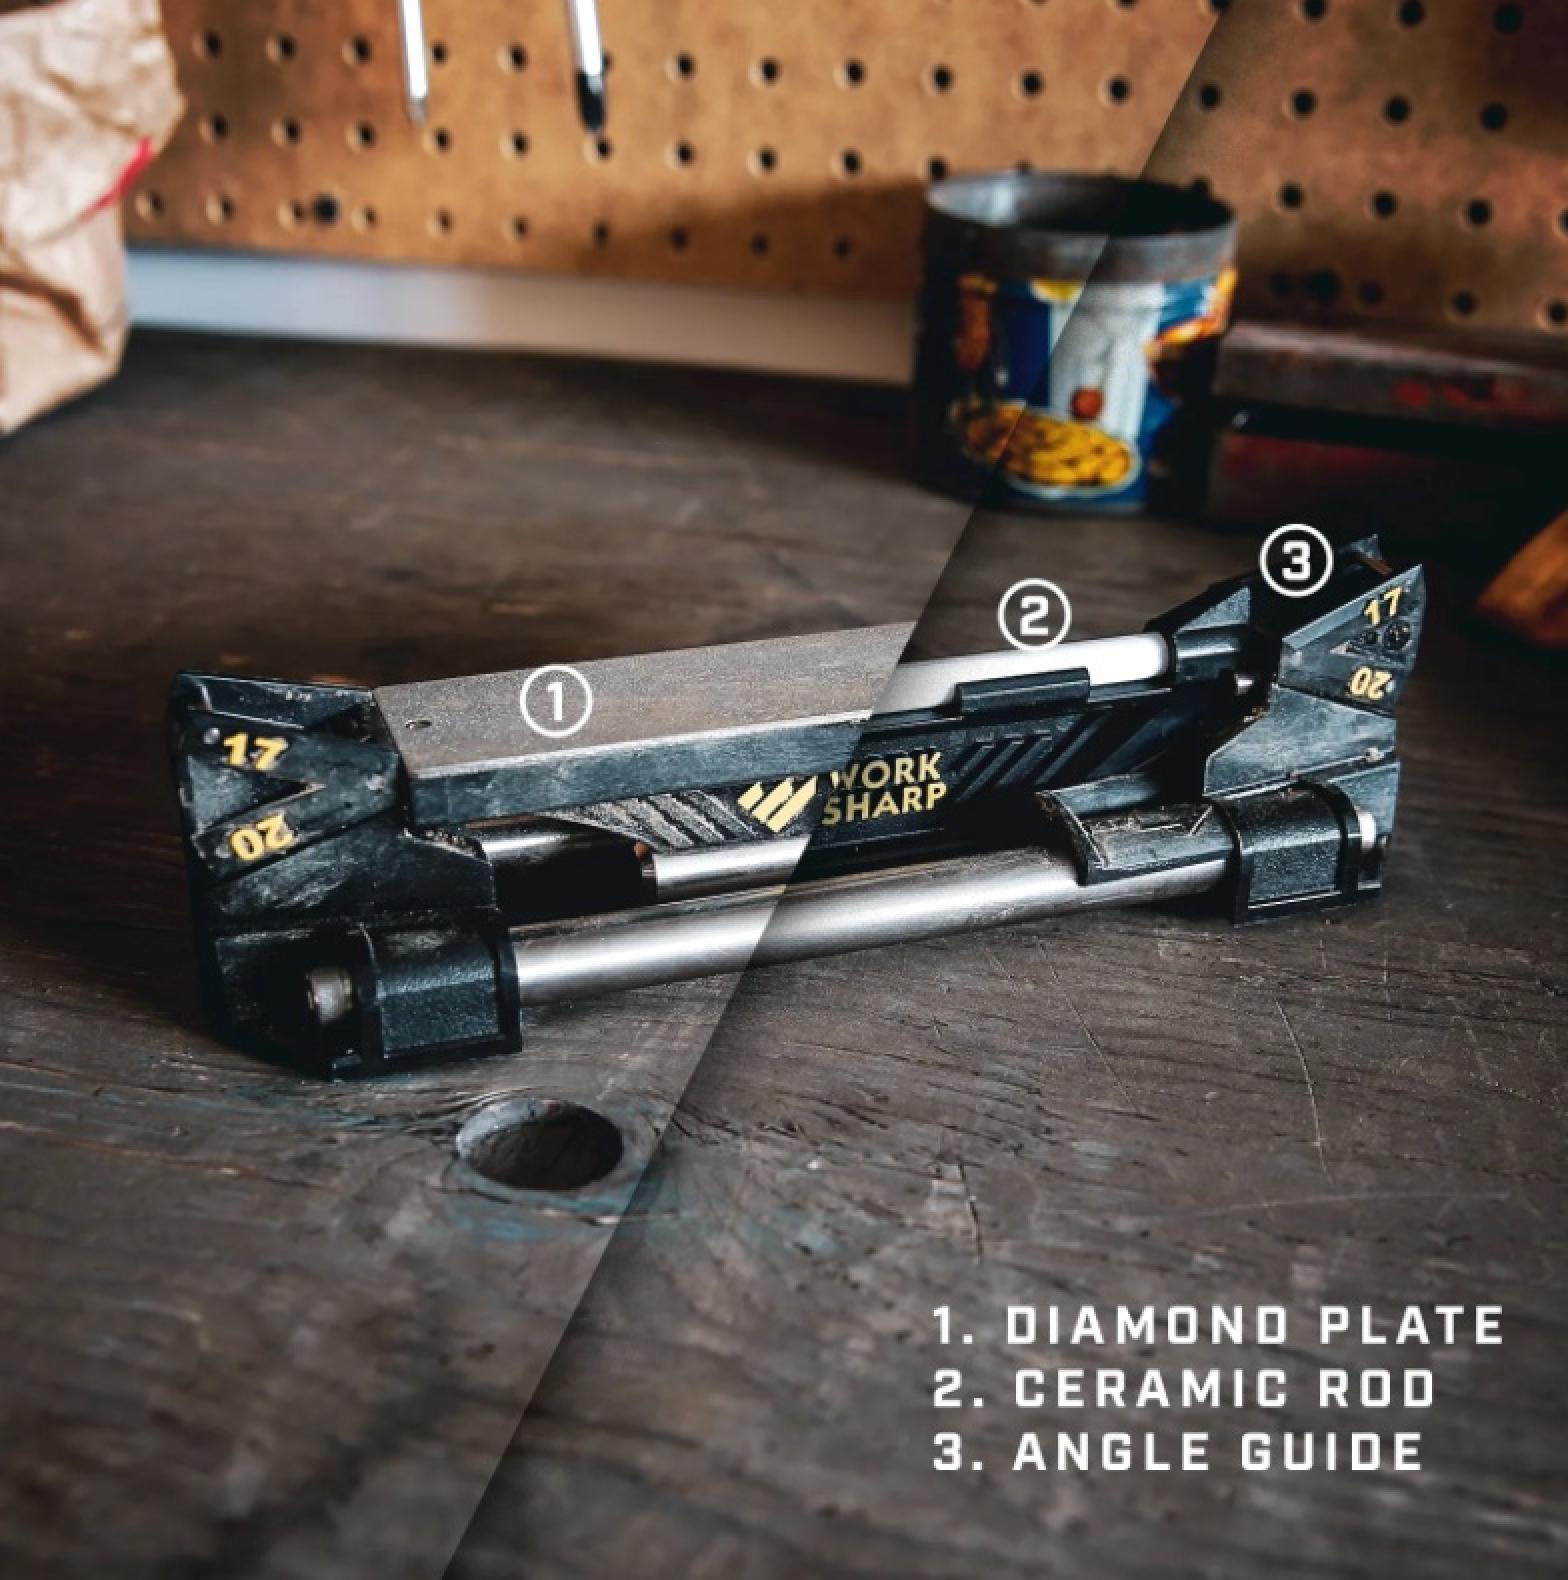 Work Sharp Guided Sharpening System With Pivot Response